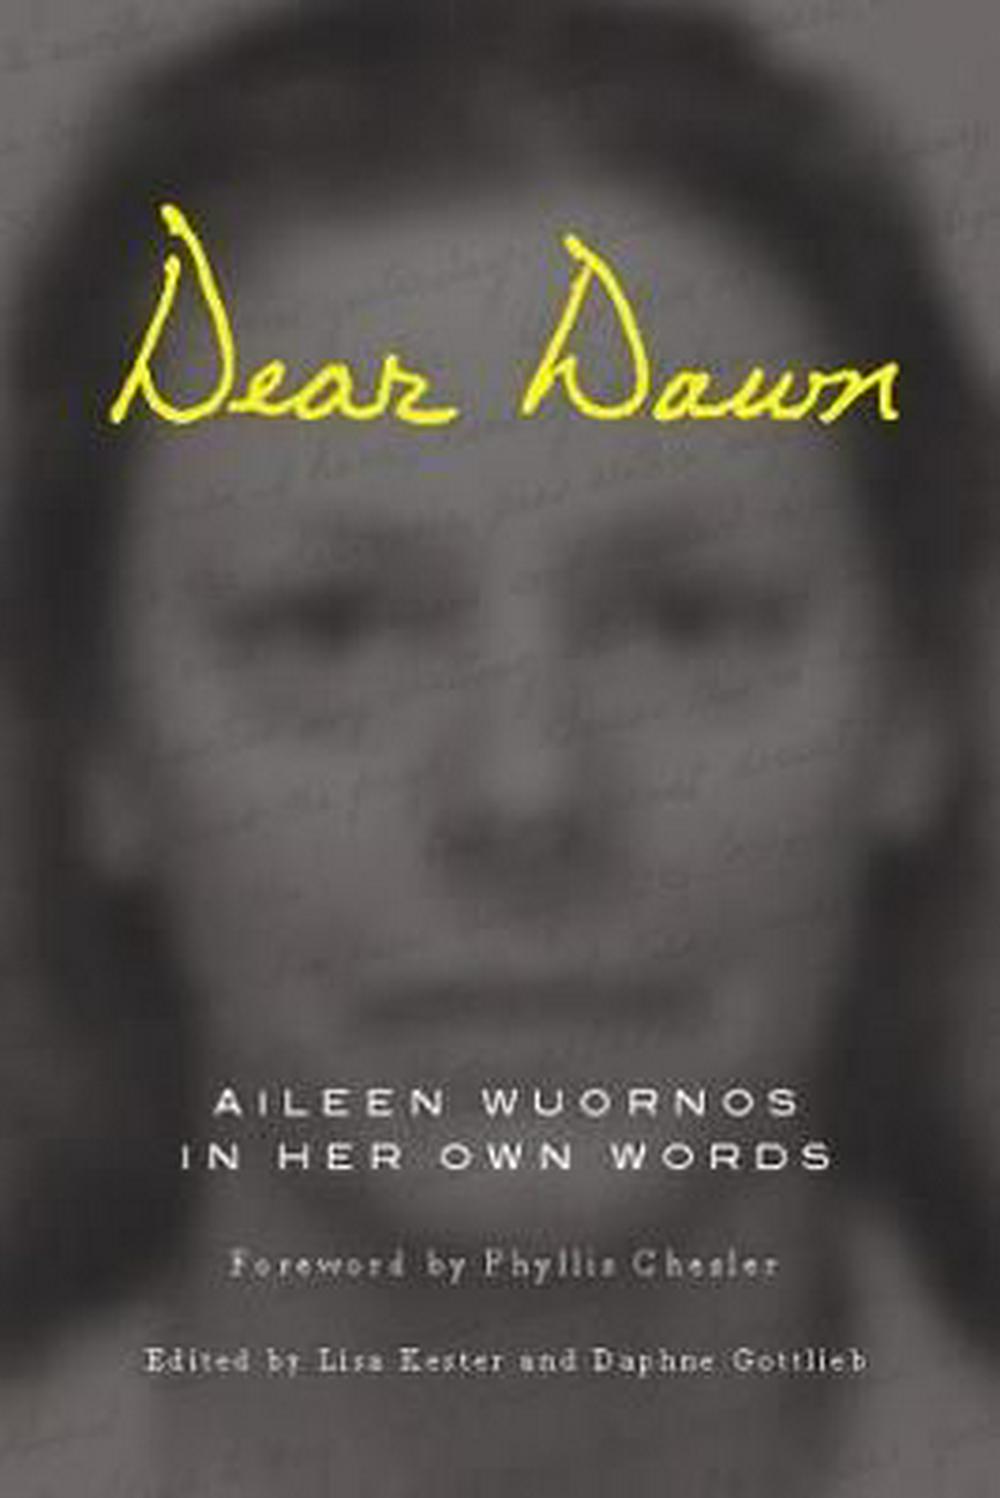 Cover of Dear Dawn- Aileen Wournos in Her Own Words by Aileen Wournos